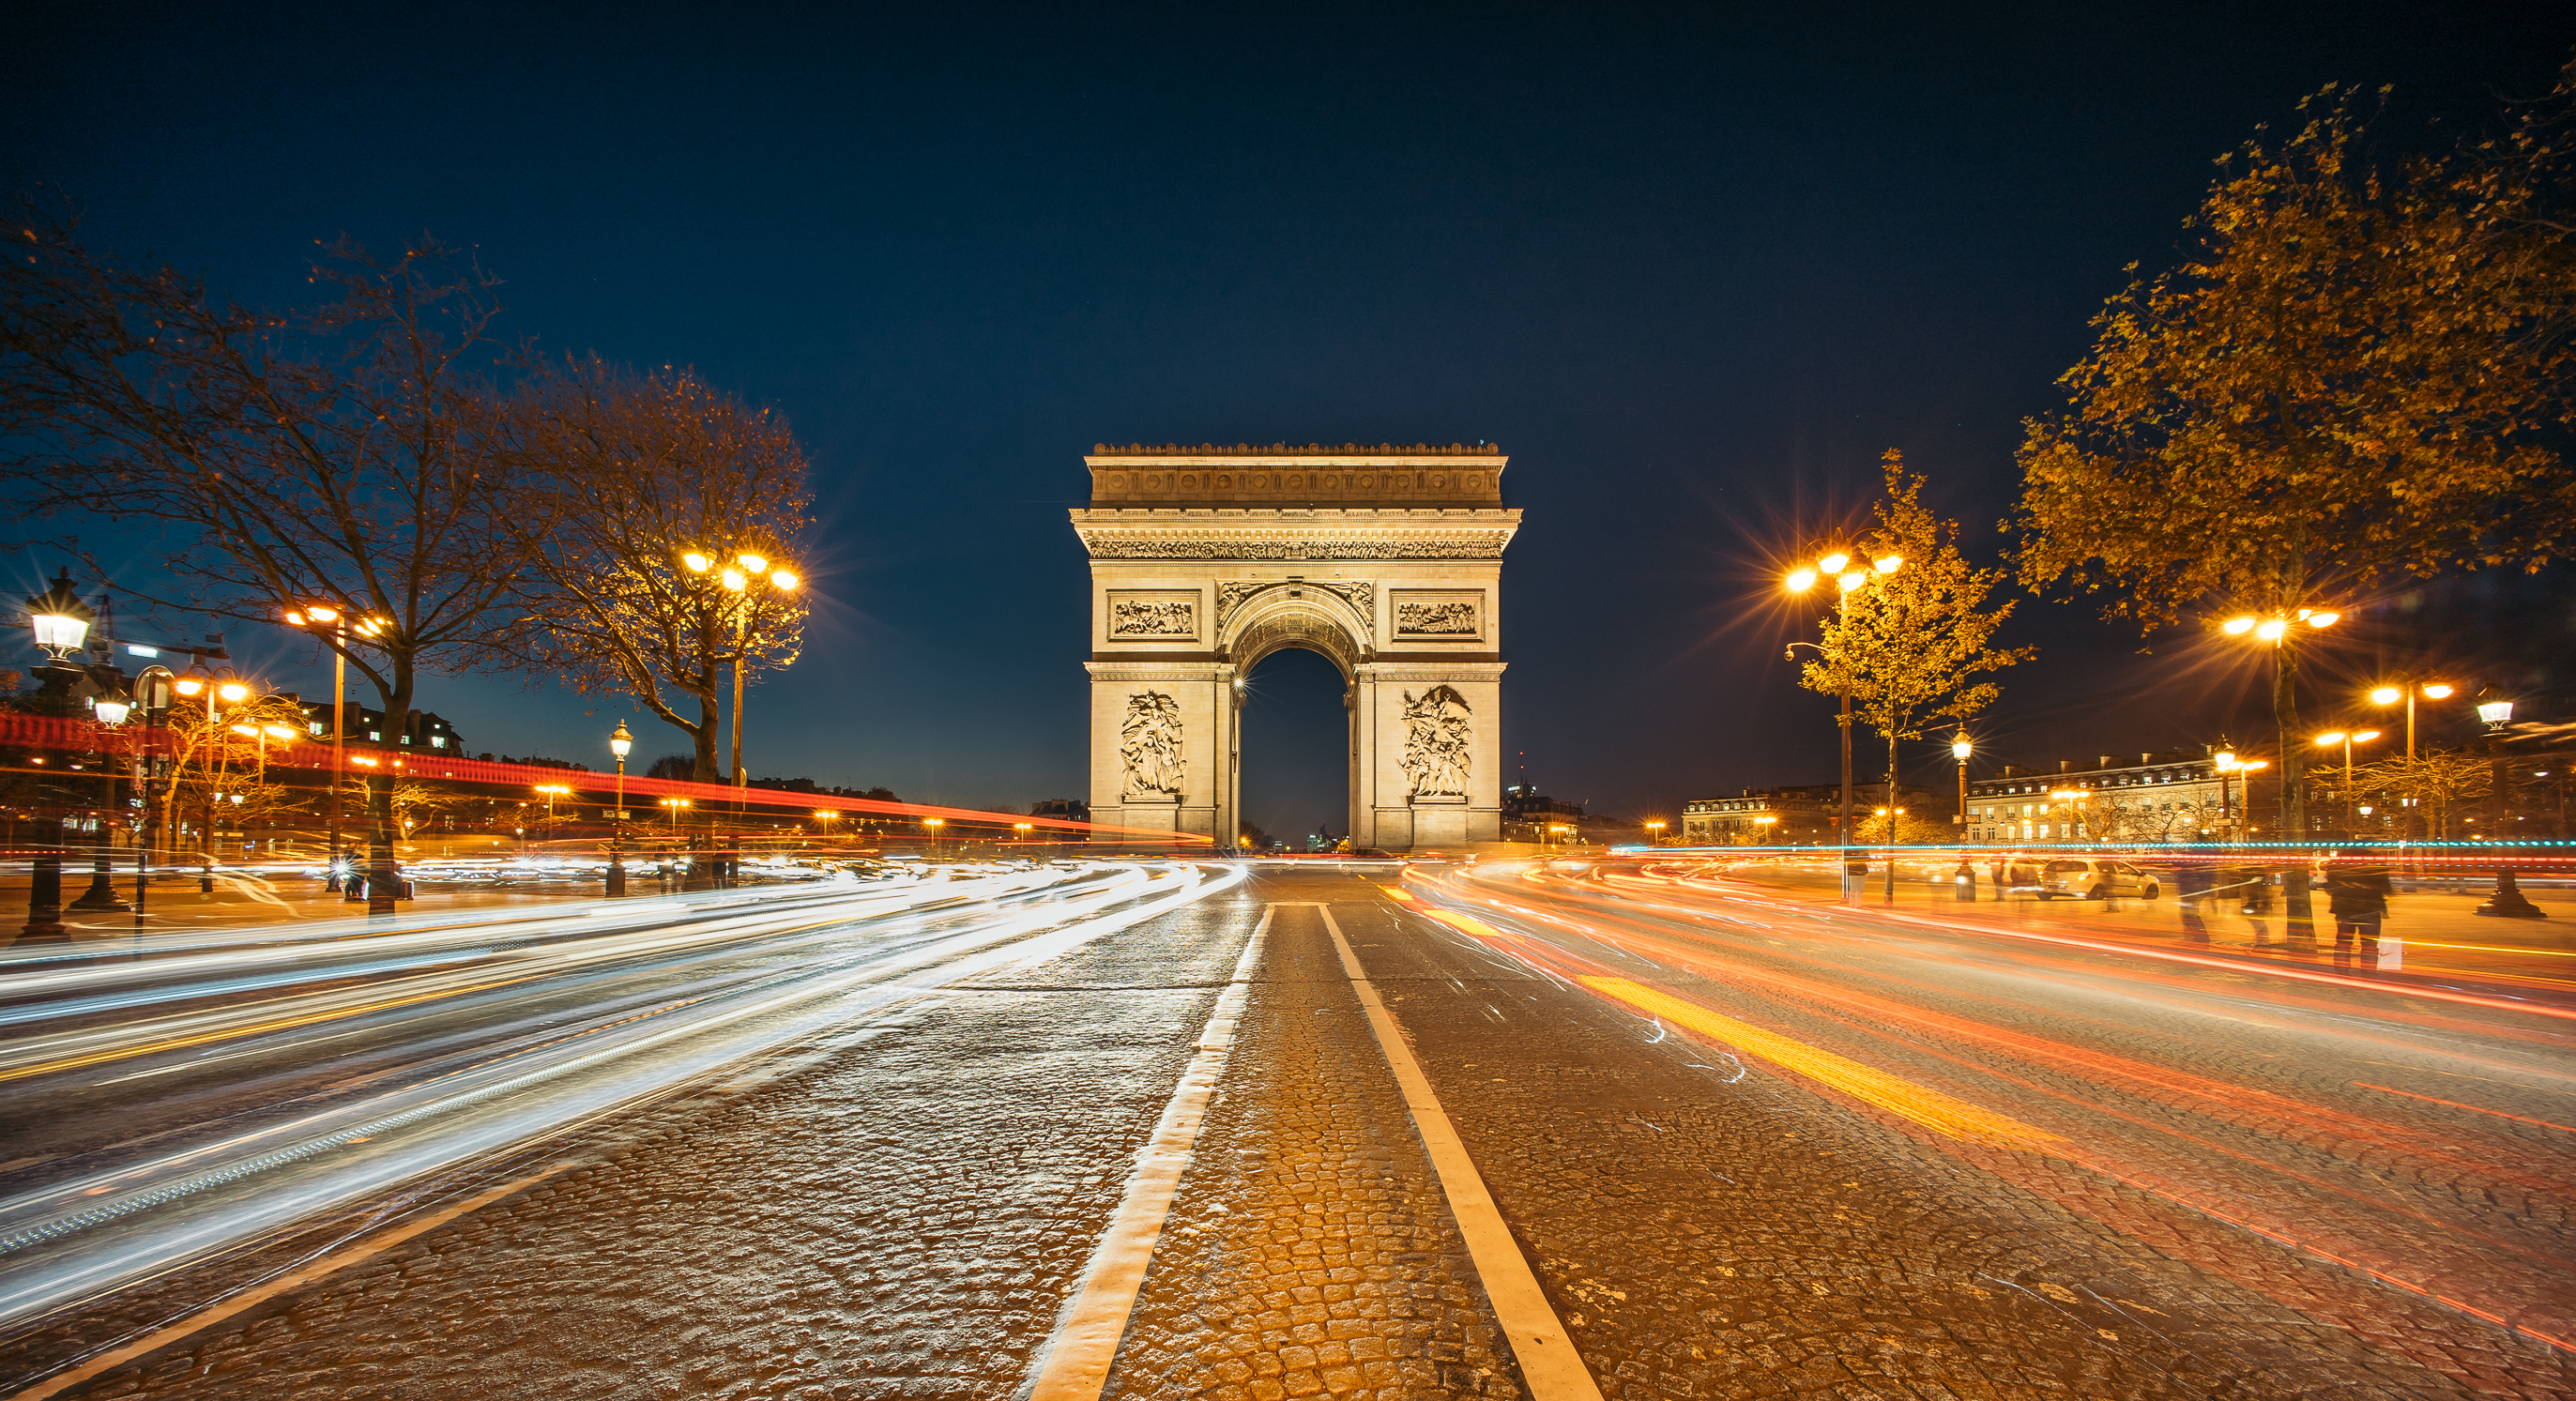 The Arc de Triomphe de l'Etoile (Triumphal Arch of the Star) at Night. It is one of the most famous monuments in Paris, standing at the western end of the Champs-Elyseees.